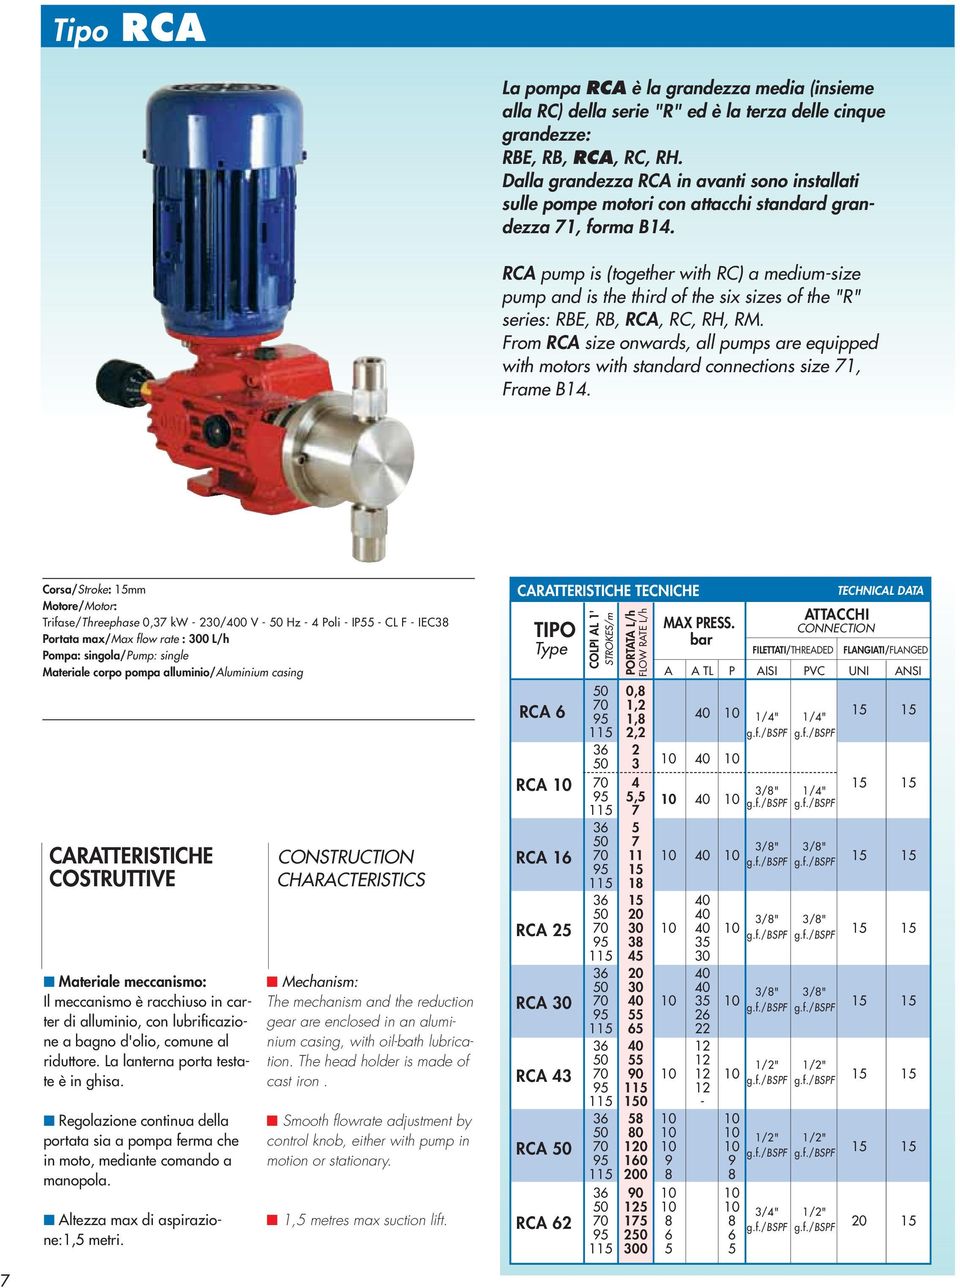 RCA pump is (together with RC) a medium-size pump and is the third of the six sizes of the "R" series: RBE, RB, RCA, RC, RH, RM.